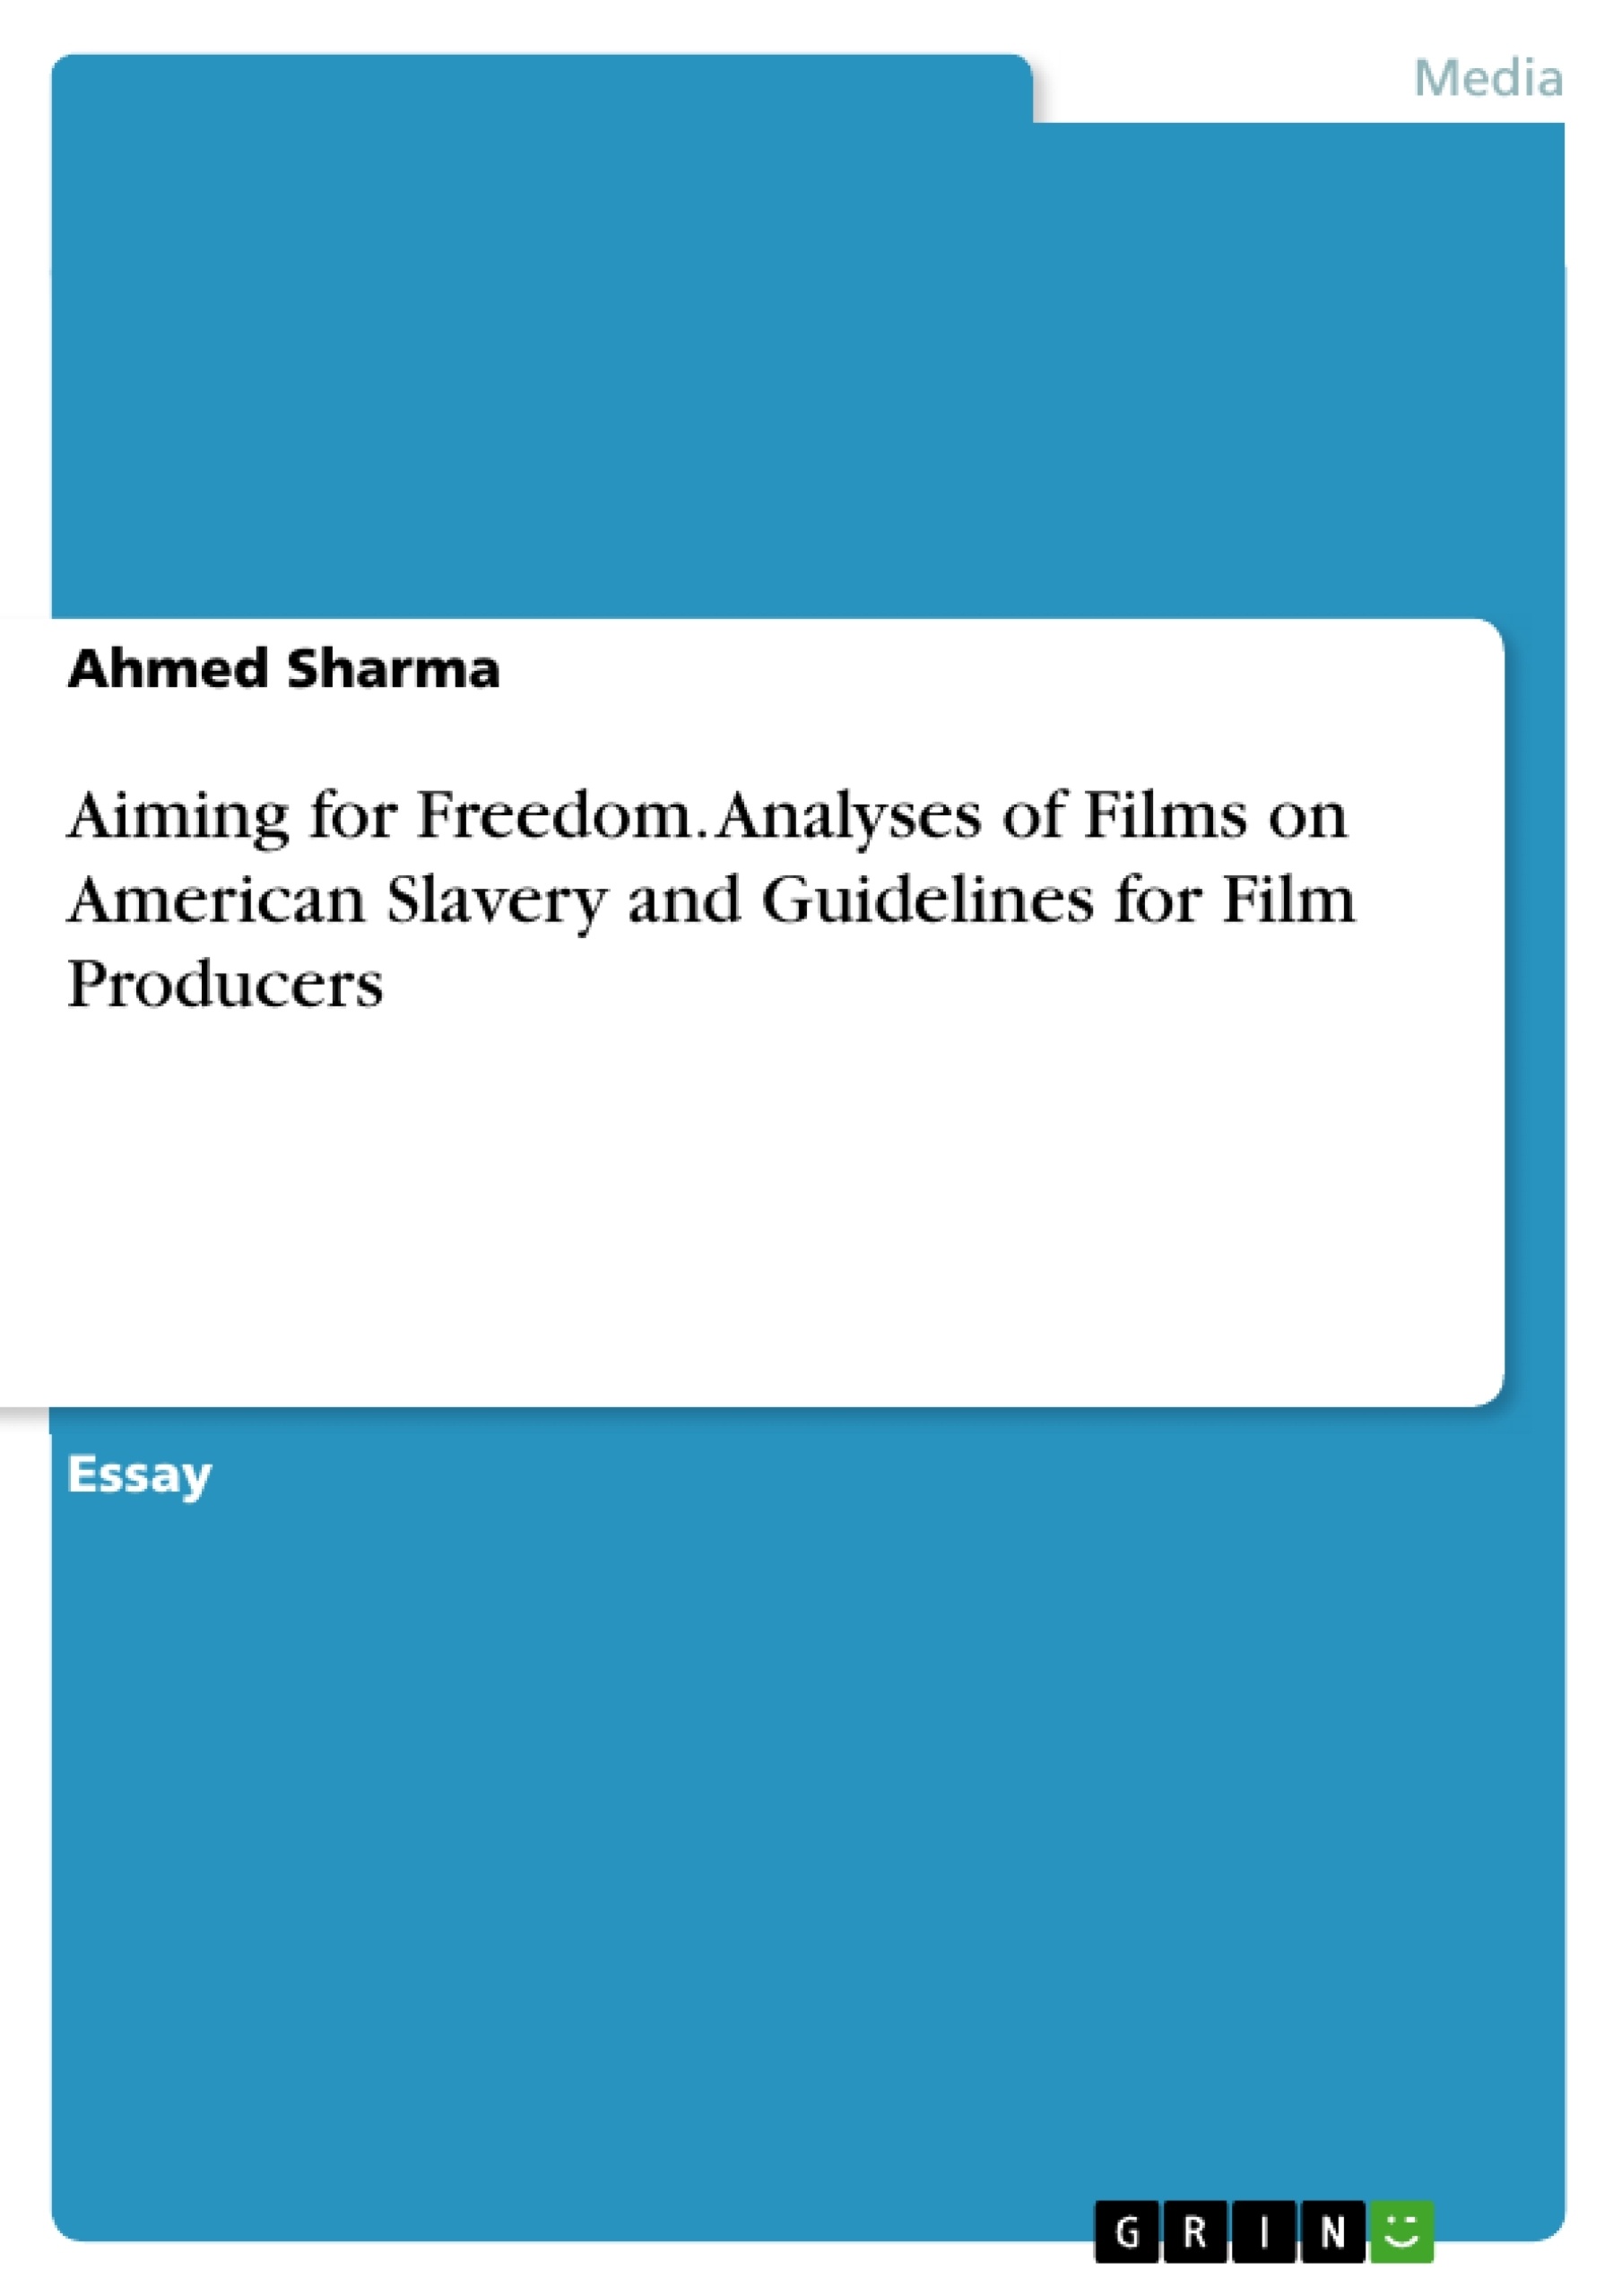 Title: Aiming for Freedom. Analyses of Films on American Slavery and Guidelines for Film Producers